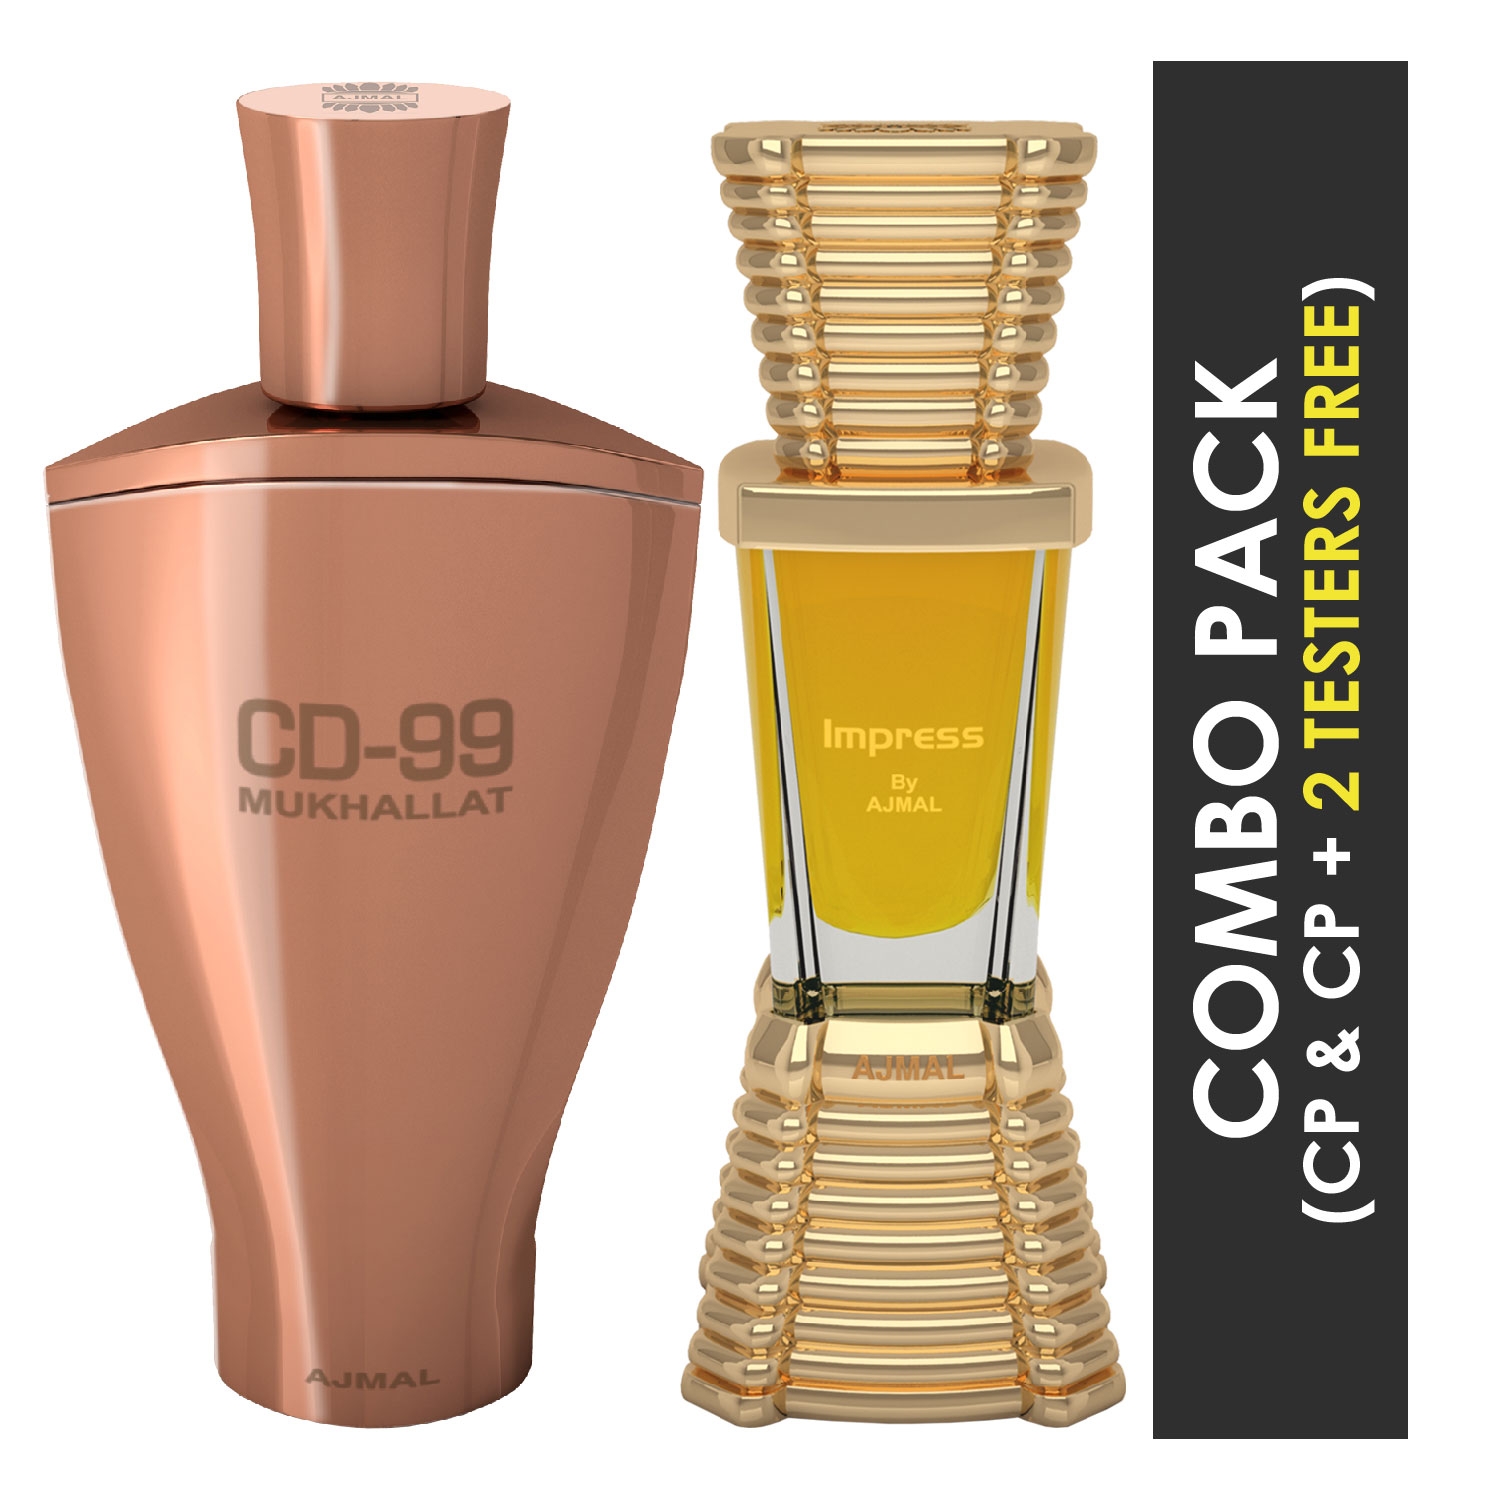 Ajmal | Ajmal CD 99 Mukhallat Concentrated Perfume Oil Floral Oriental Alcohol-free Attar 14ml for Unisex and Impress Concentrated Perfume Oil Citrus Alcohol-free Attar 10ml for Men + 2 Parfum Testers FREE